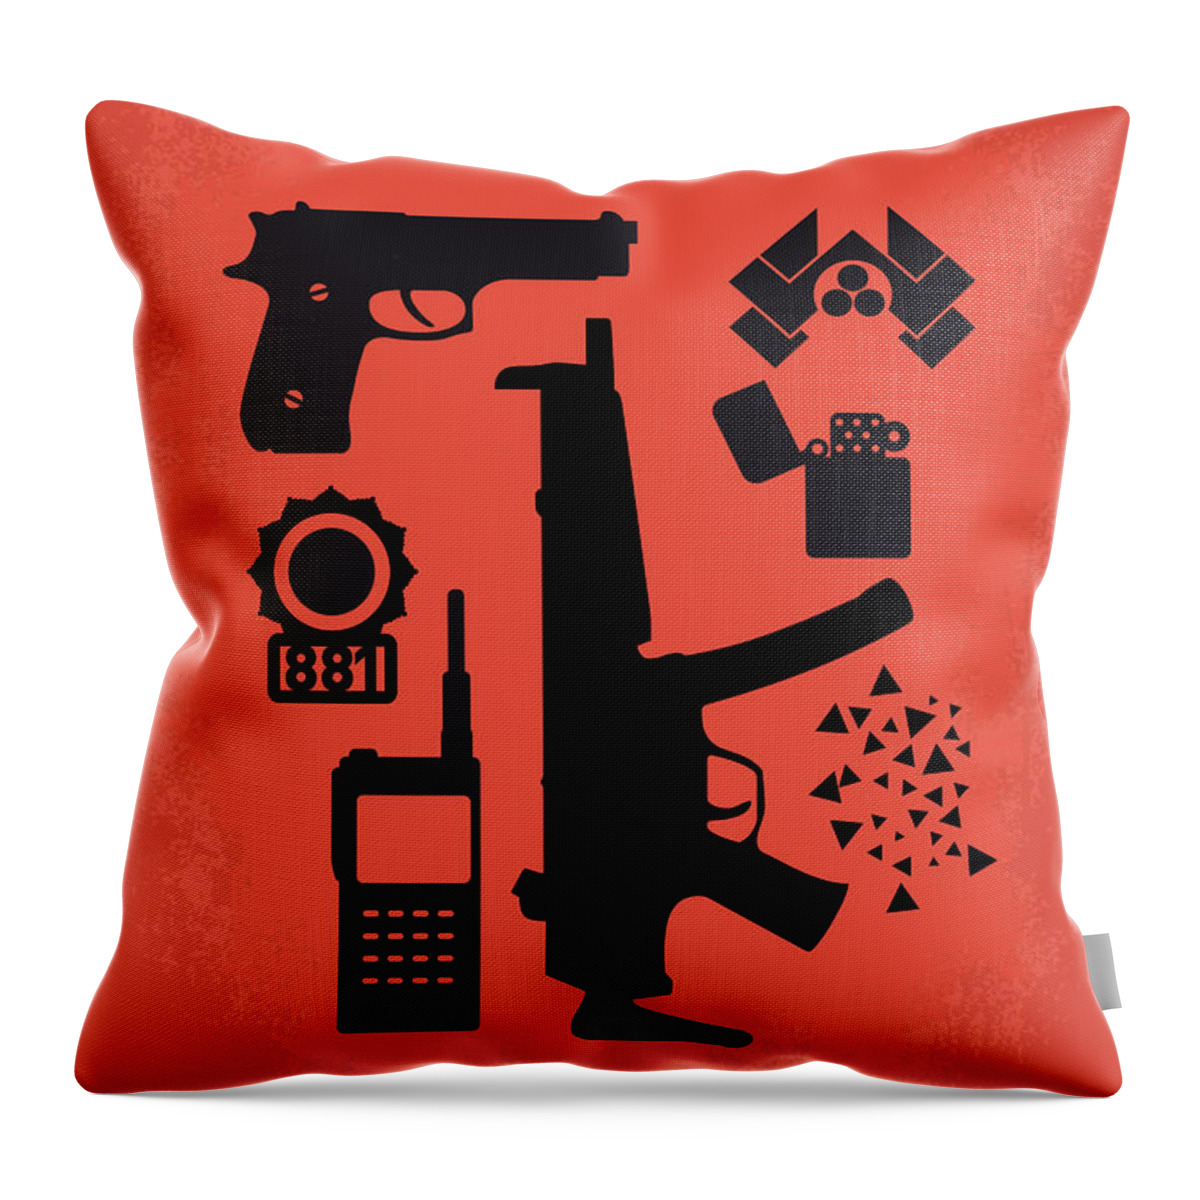 Die Hard Throw Pillow featuring the digital art No453 My Die Hard minimal movie poster by Chungkong Art